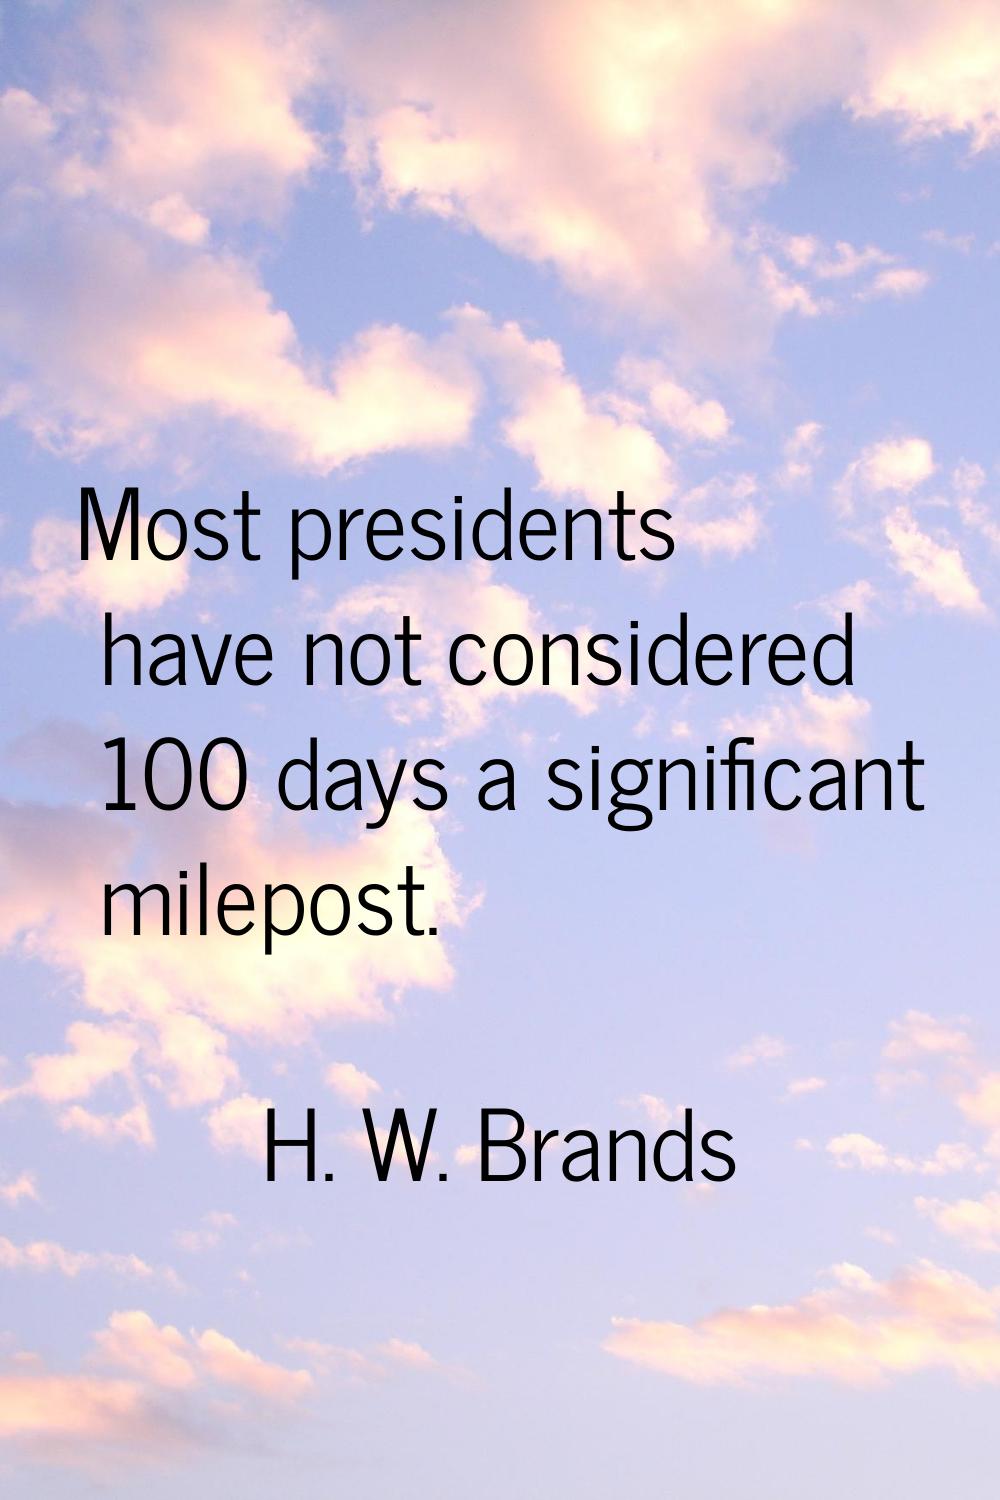 Most presidents have not considered 100 days a significant milepost.